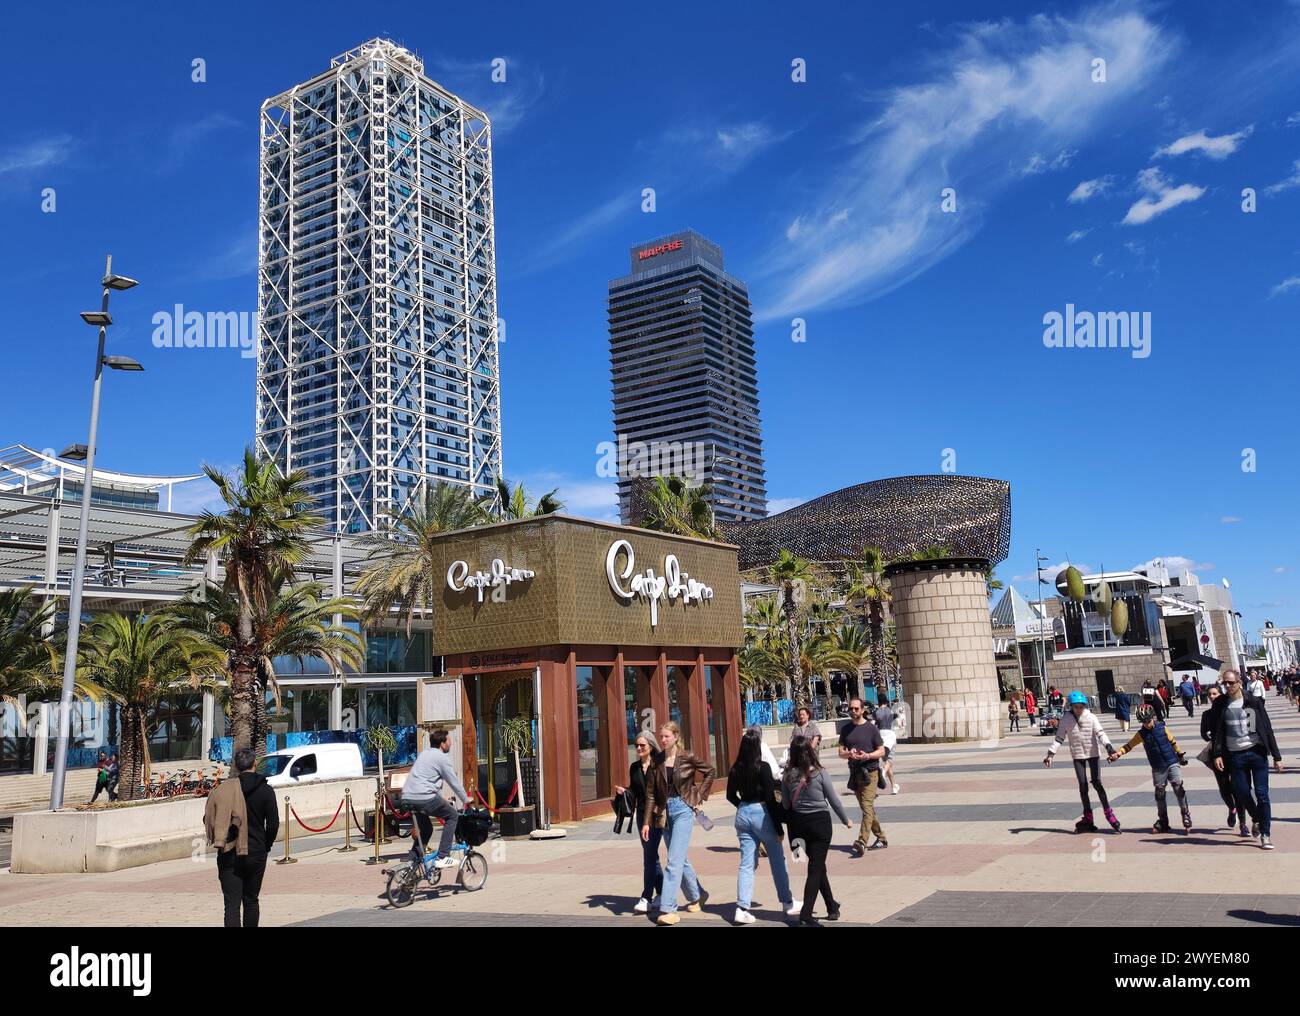 Barcelona: Twin Towers (Hotel Arts and Torre Mapfre), Carpe Diem restaurant (CDLC) and sculpture 'Golden Fish' by Frank Gehry, in the Olympic Port are Stock Photo